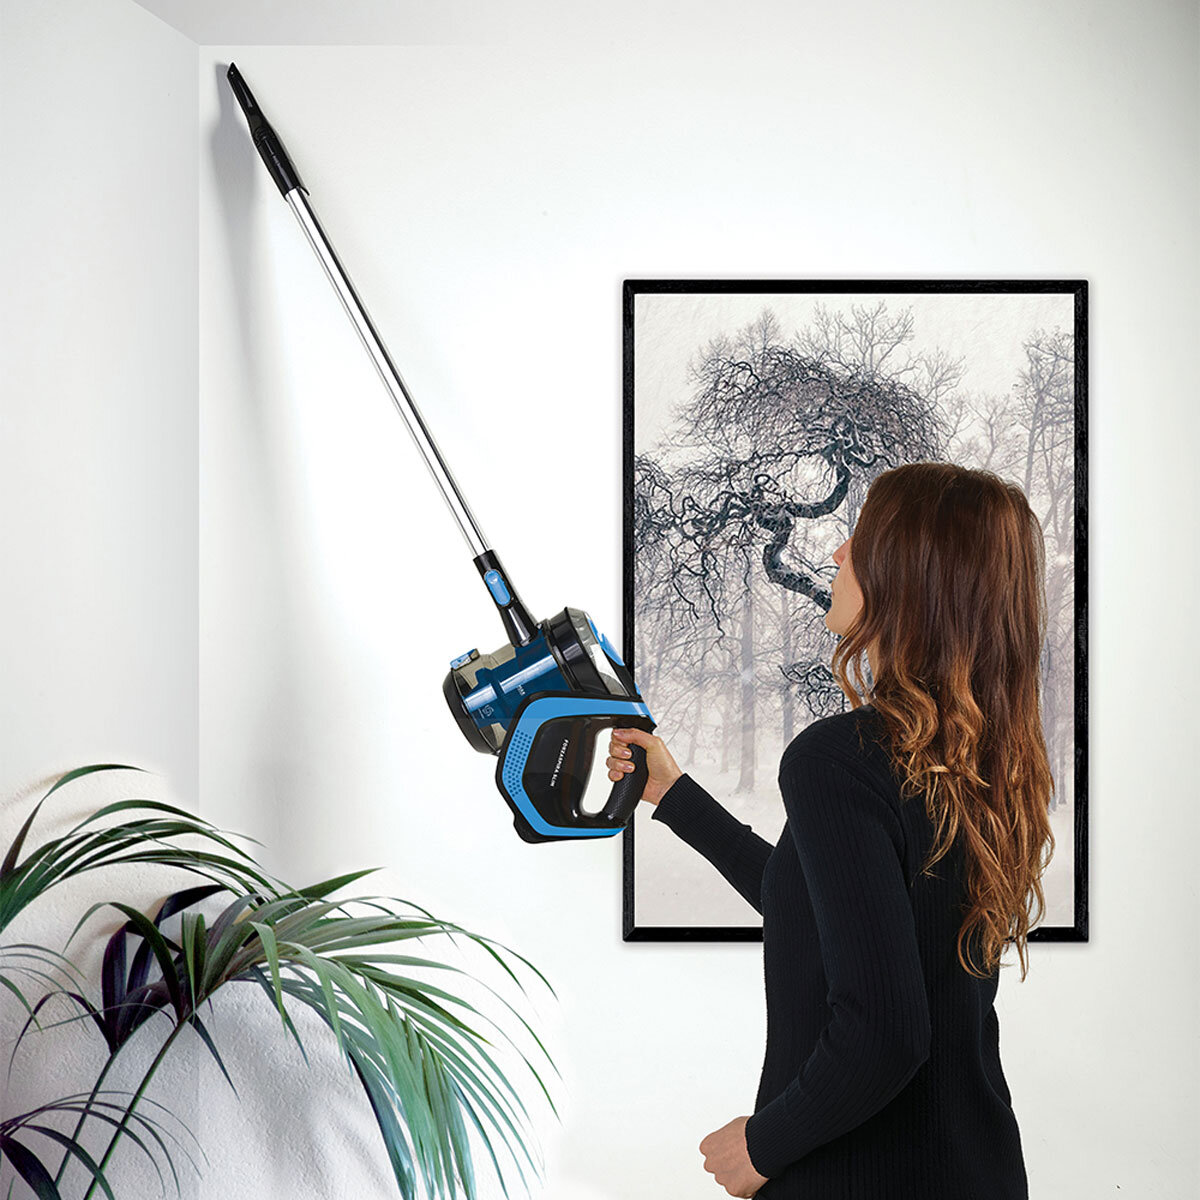 Lifestyle image of woman vacuuming ceiling with SR100